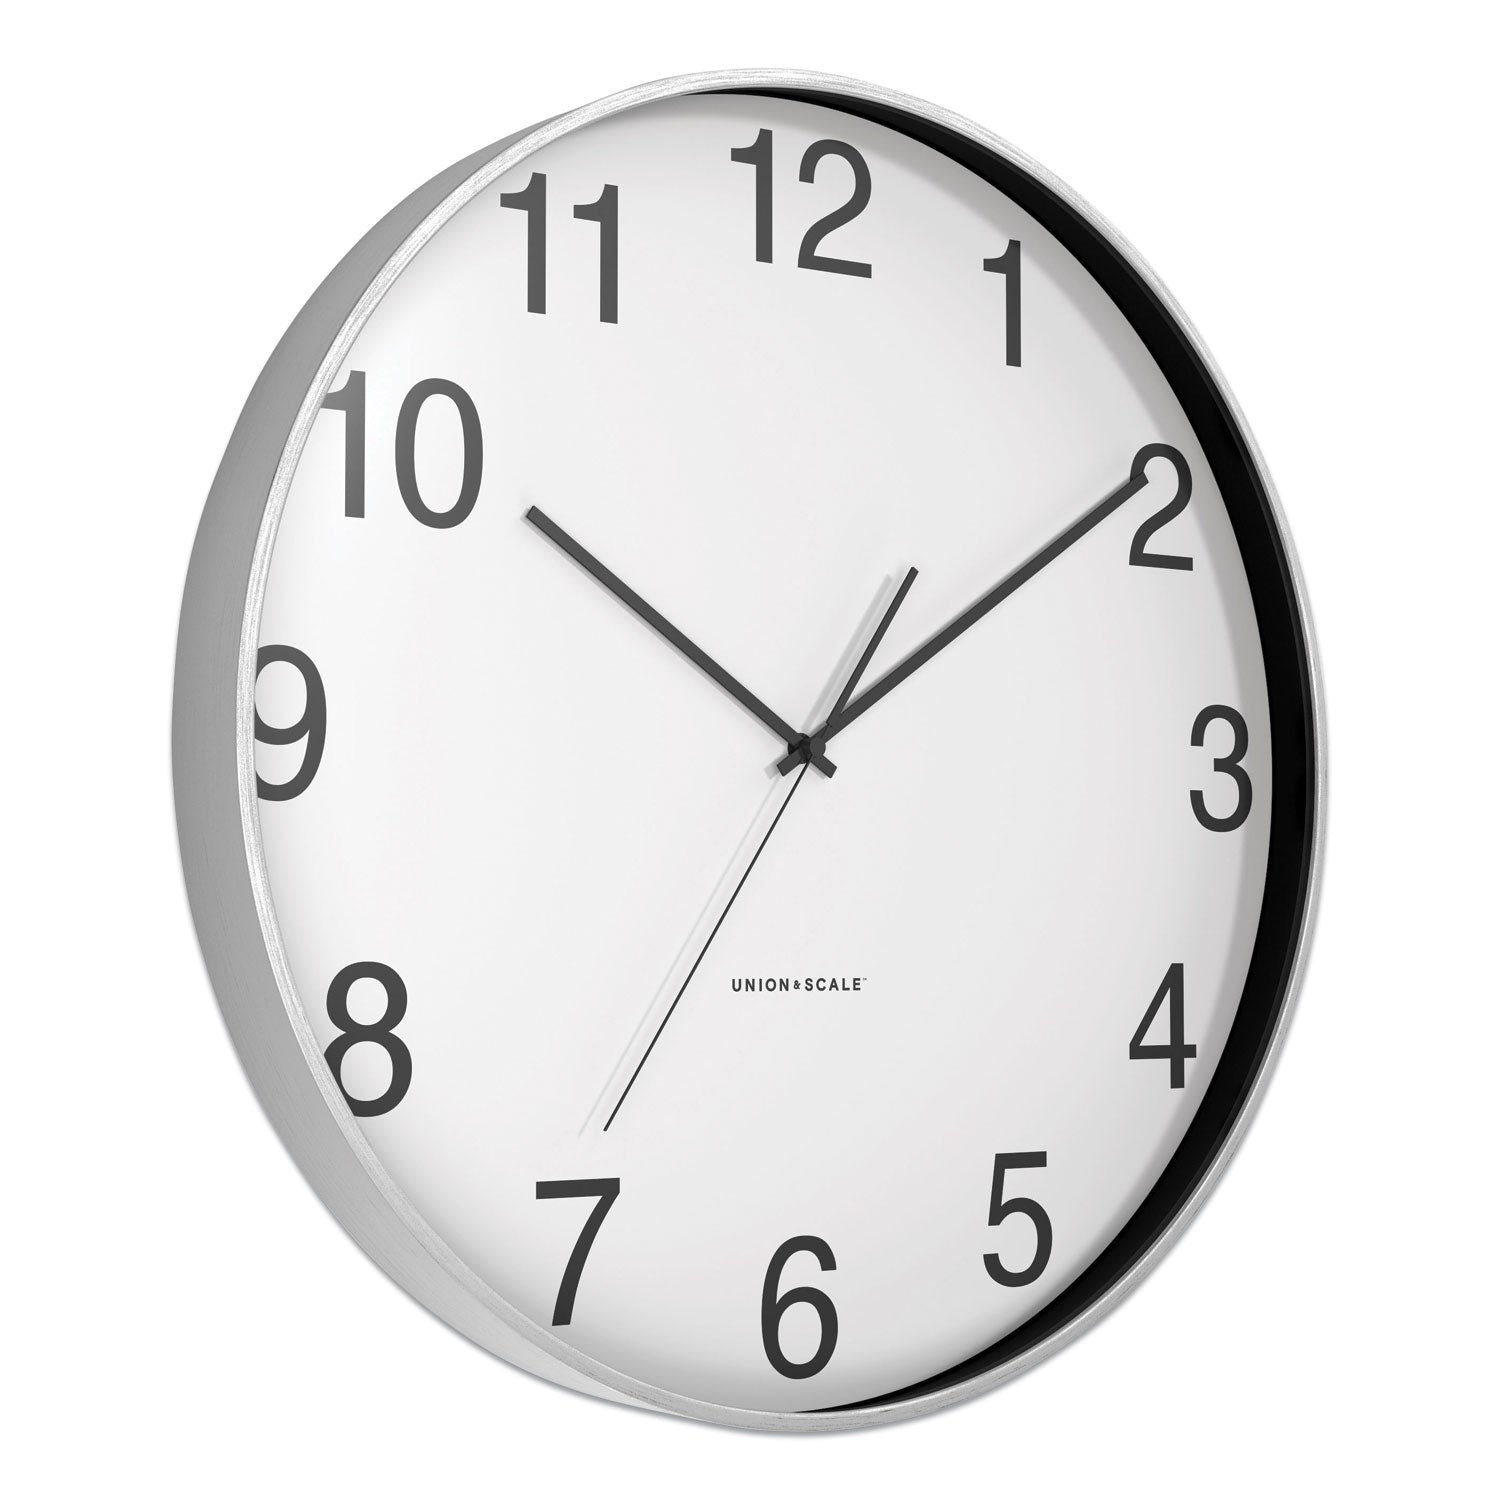 essentials-classic-round-wall-clock-12-overall-diameter-silver-case-1-aa-sold-separately_uos24411457 - 2